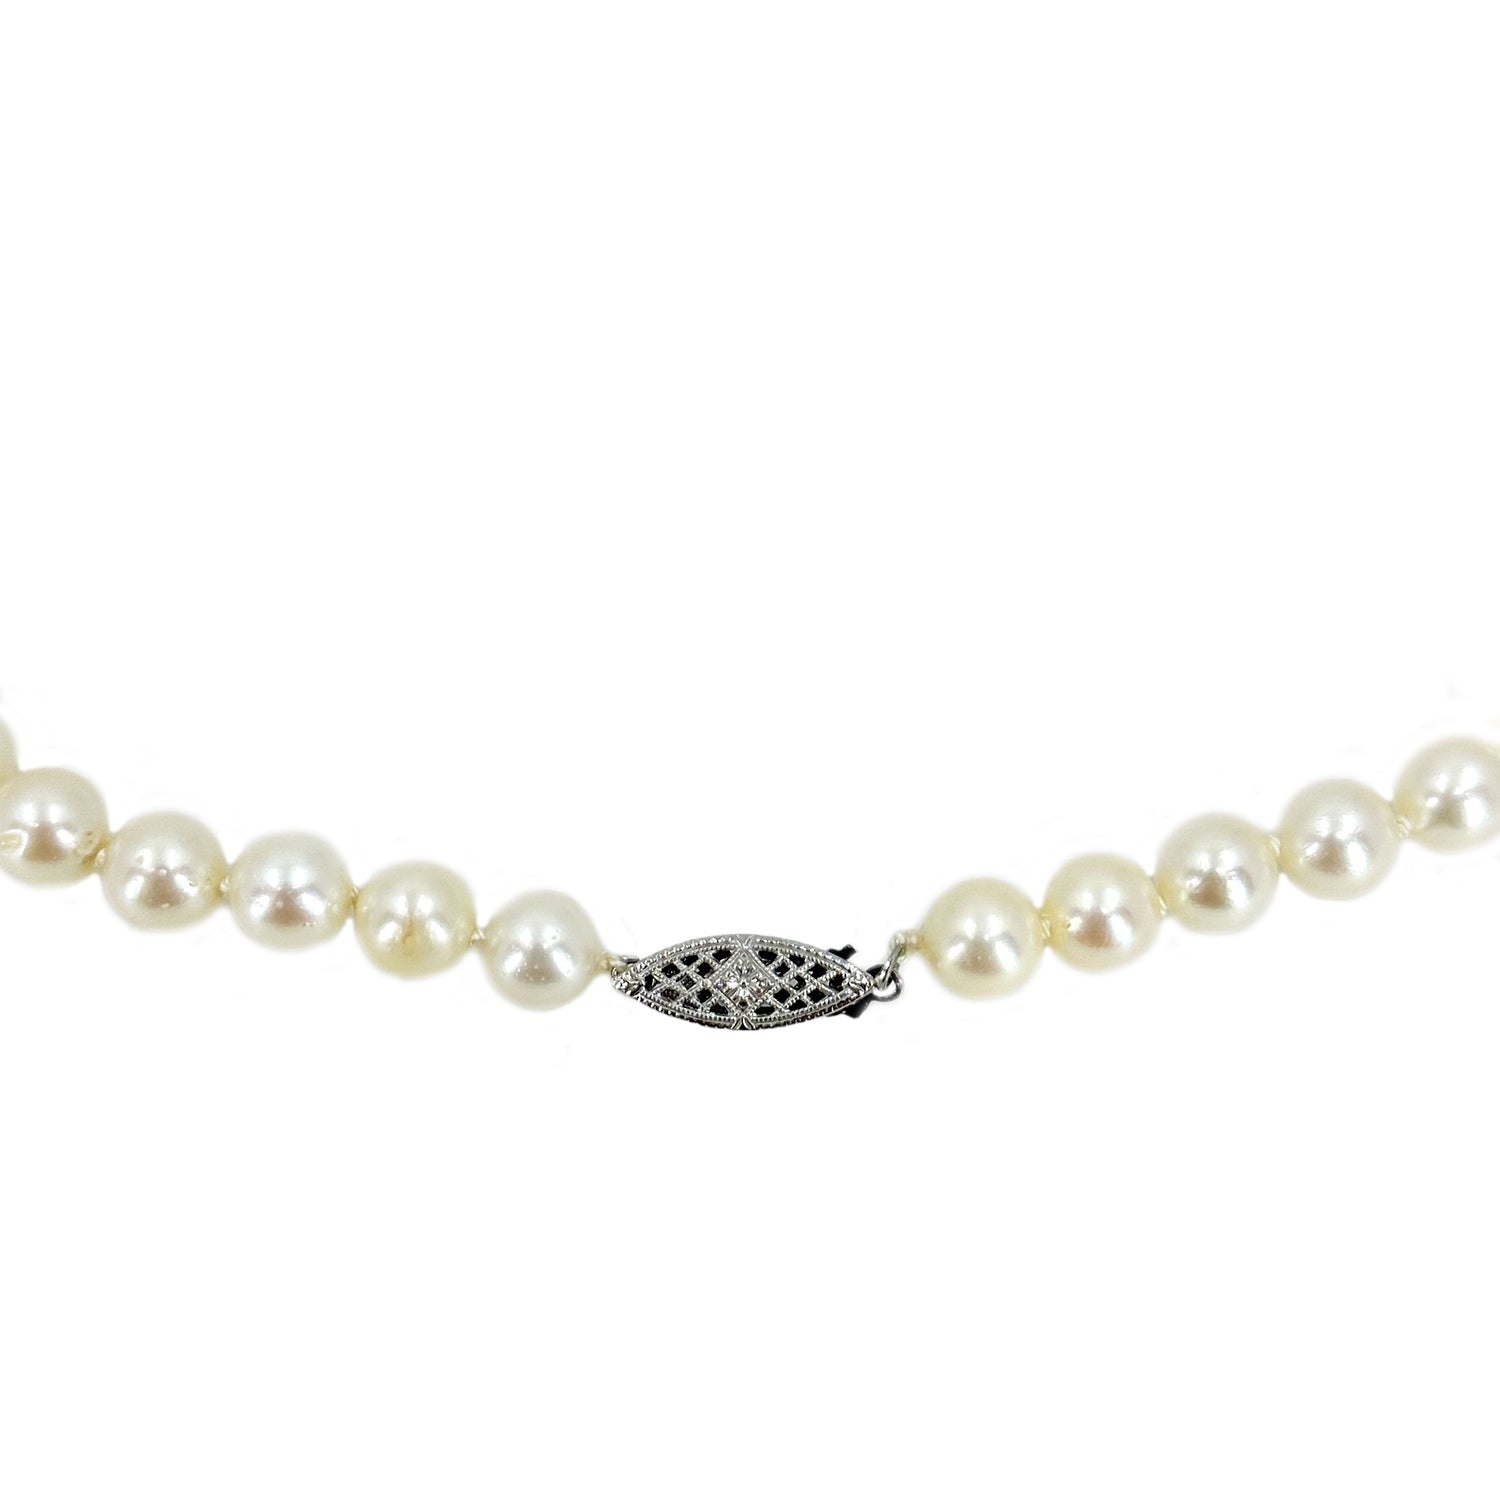 Filigree Choker Vintage Japanese Saltwater Cultured Akoya Pearl Necklace - Sterling Silver 15.75 Inch